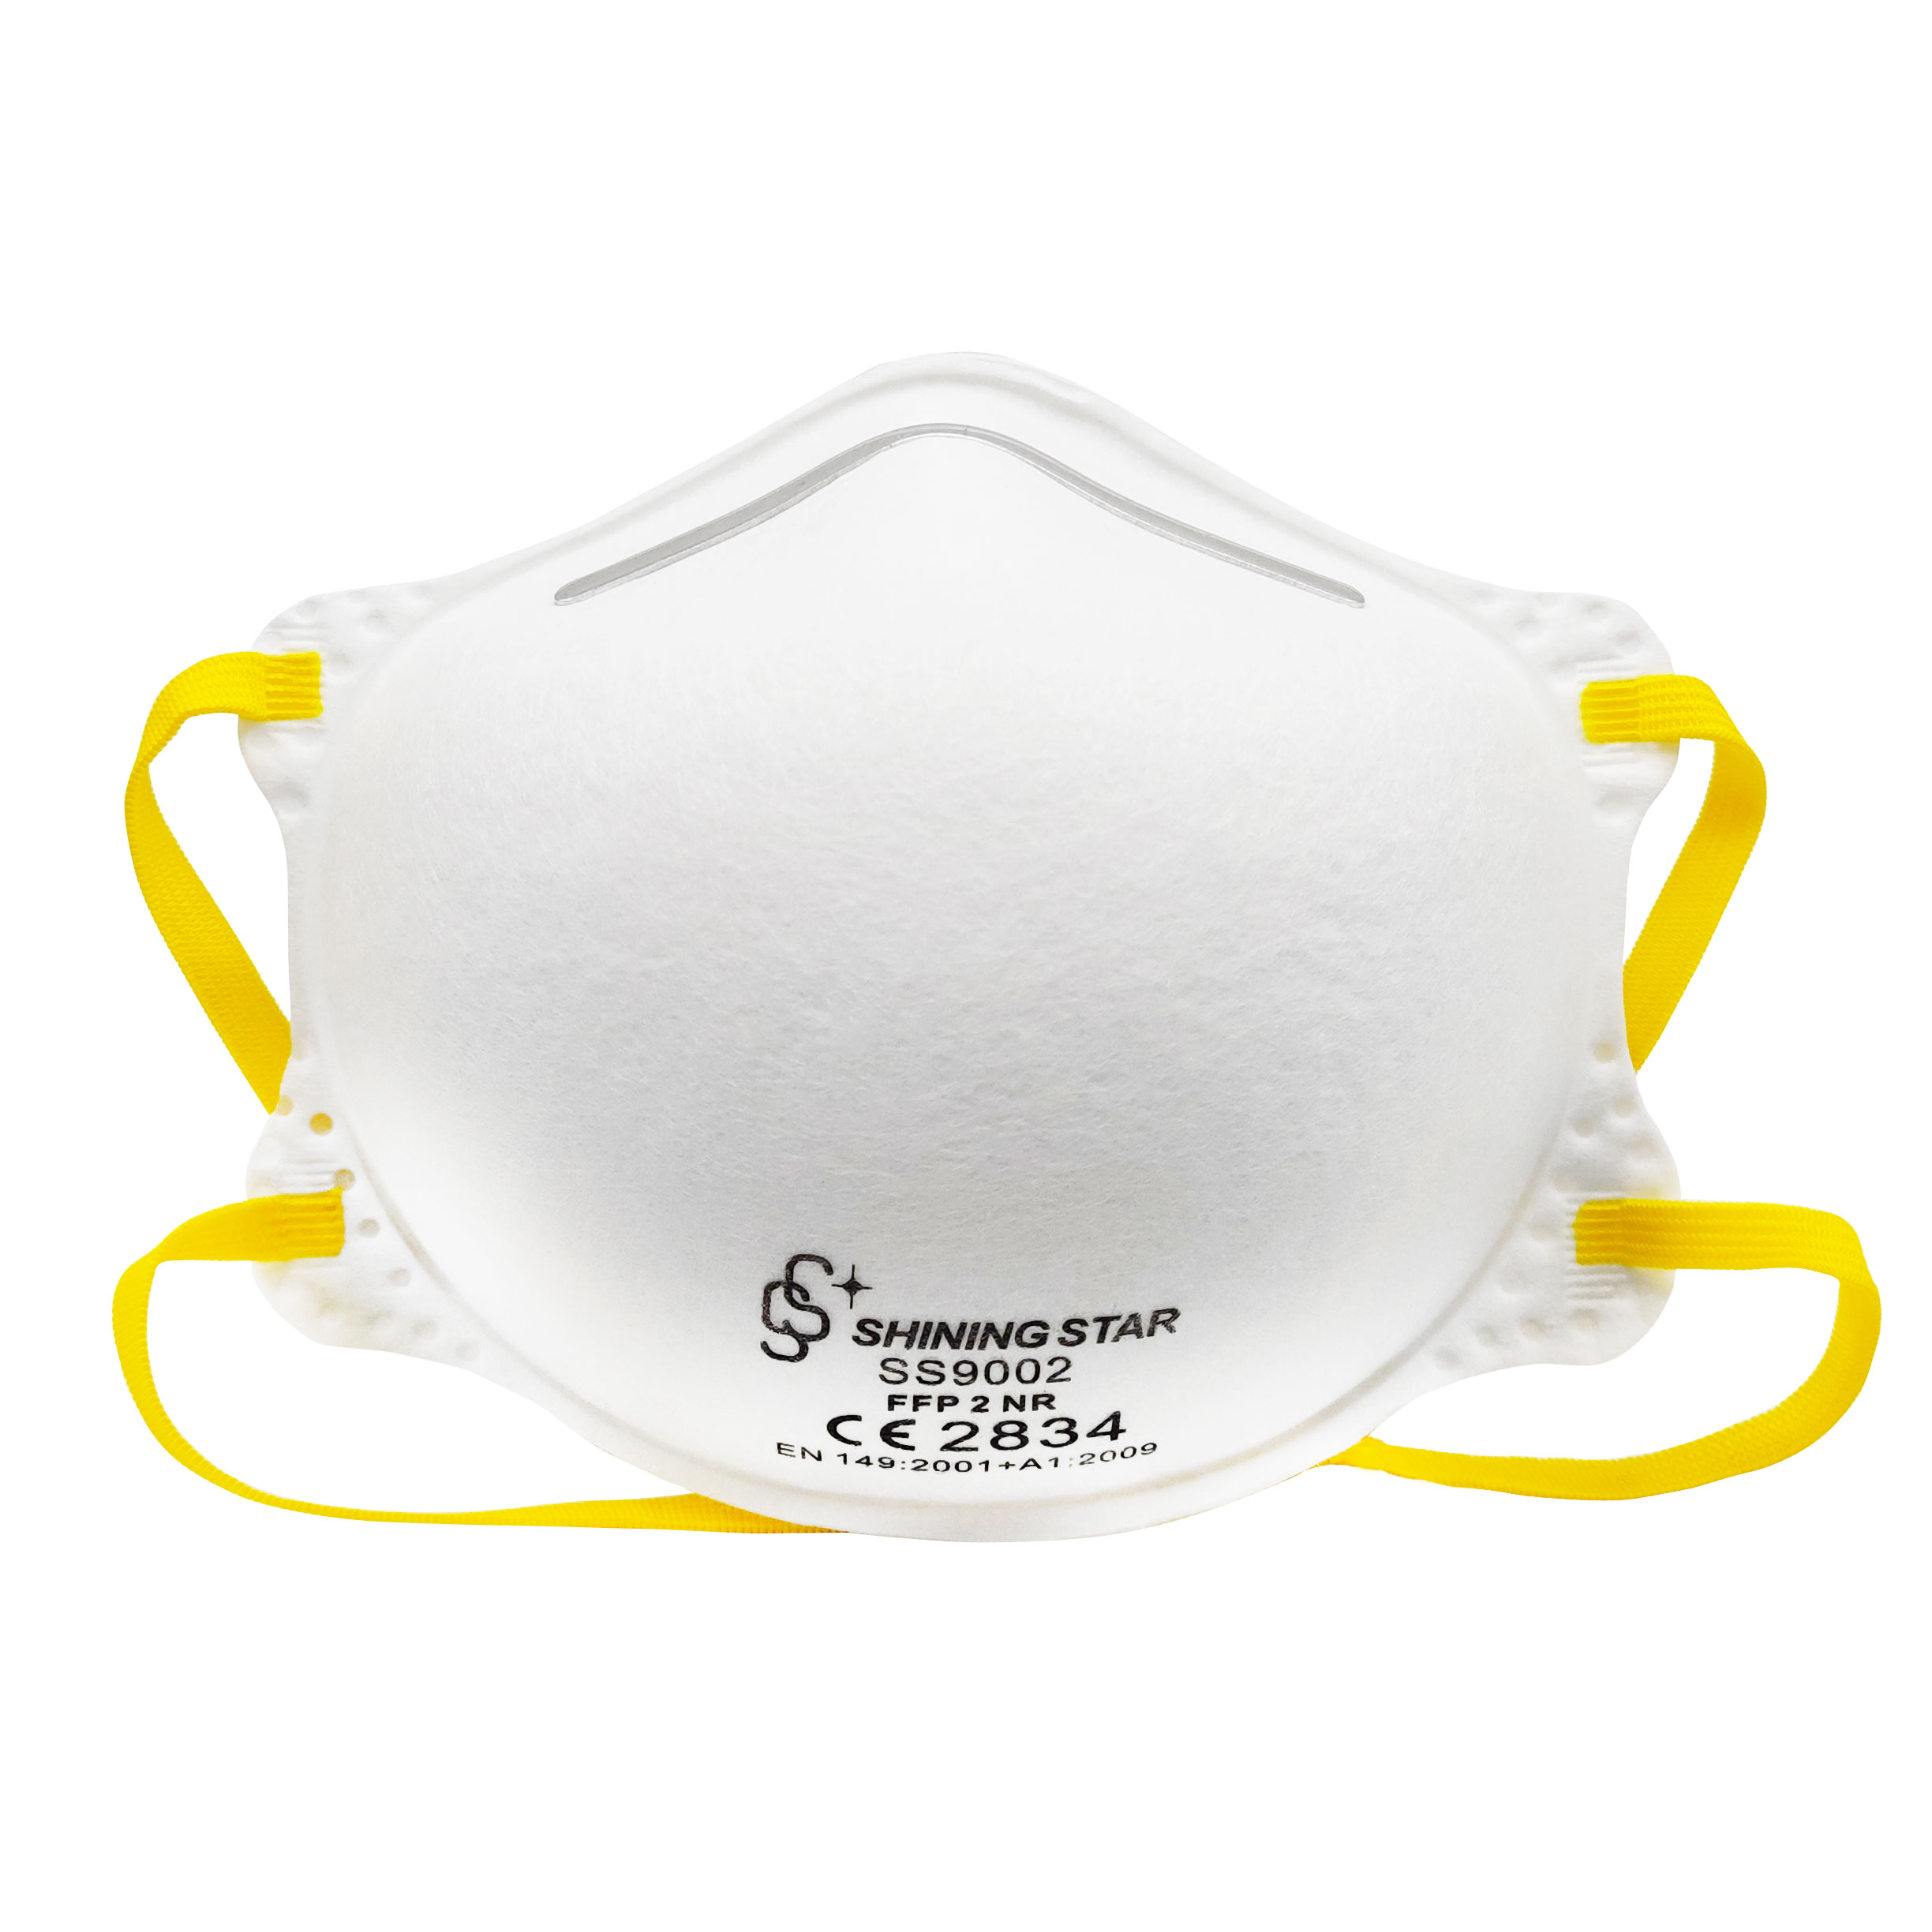 SS9002-FFP2 Disposable Particulate Respirator Featured Image